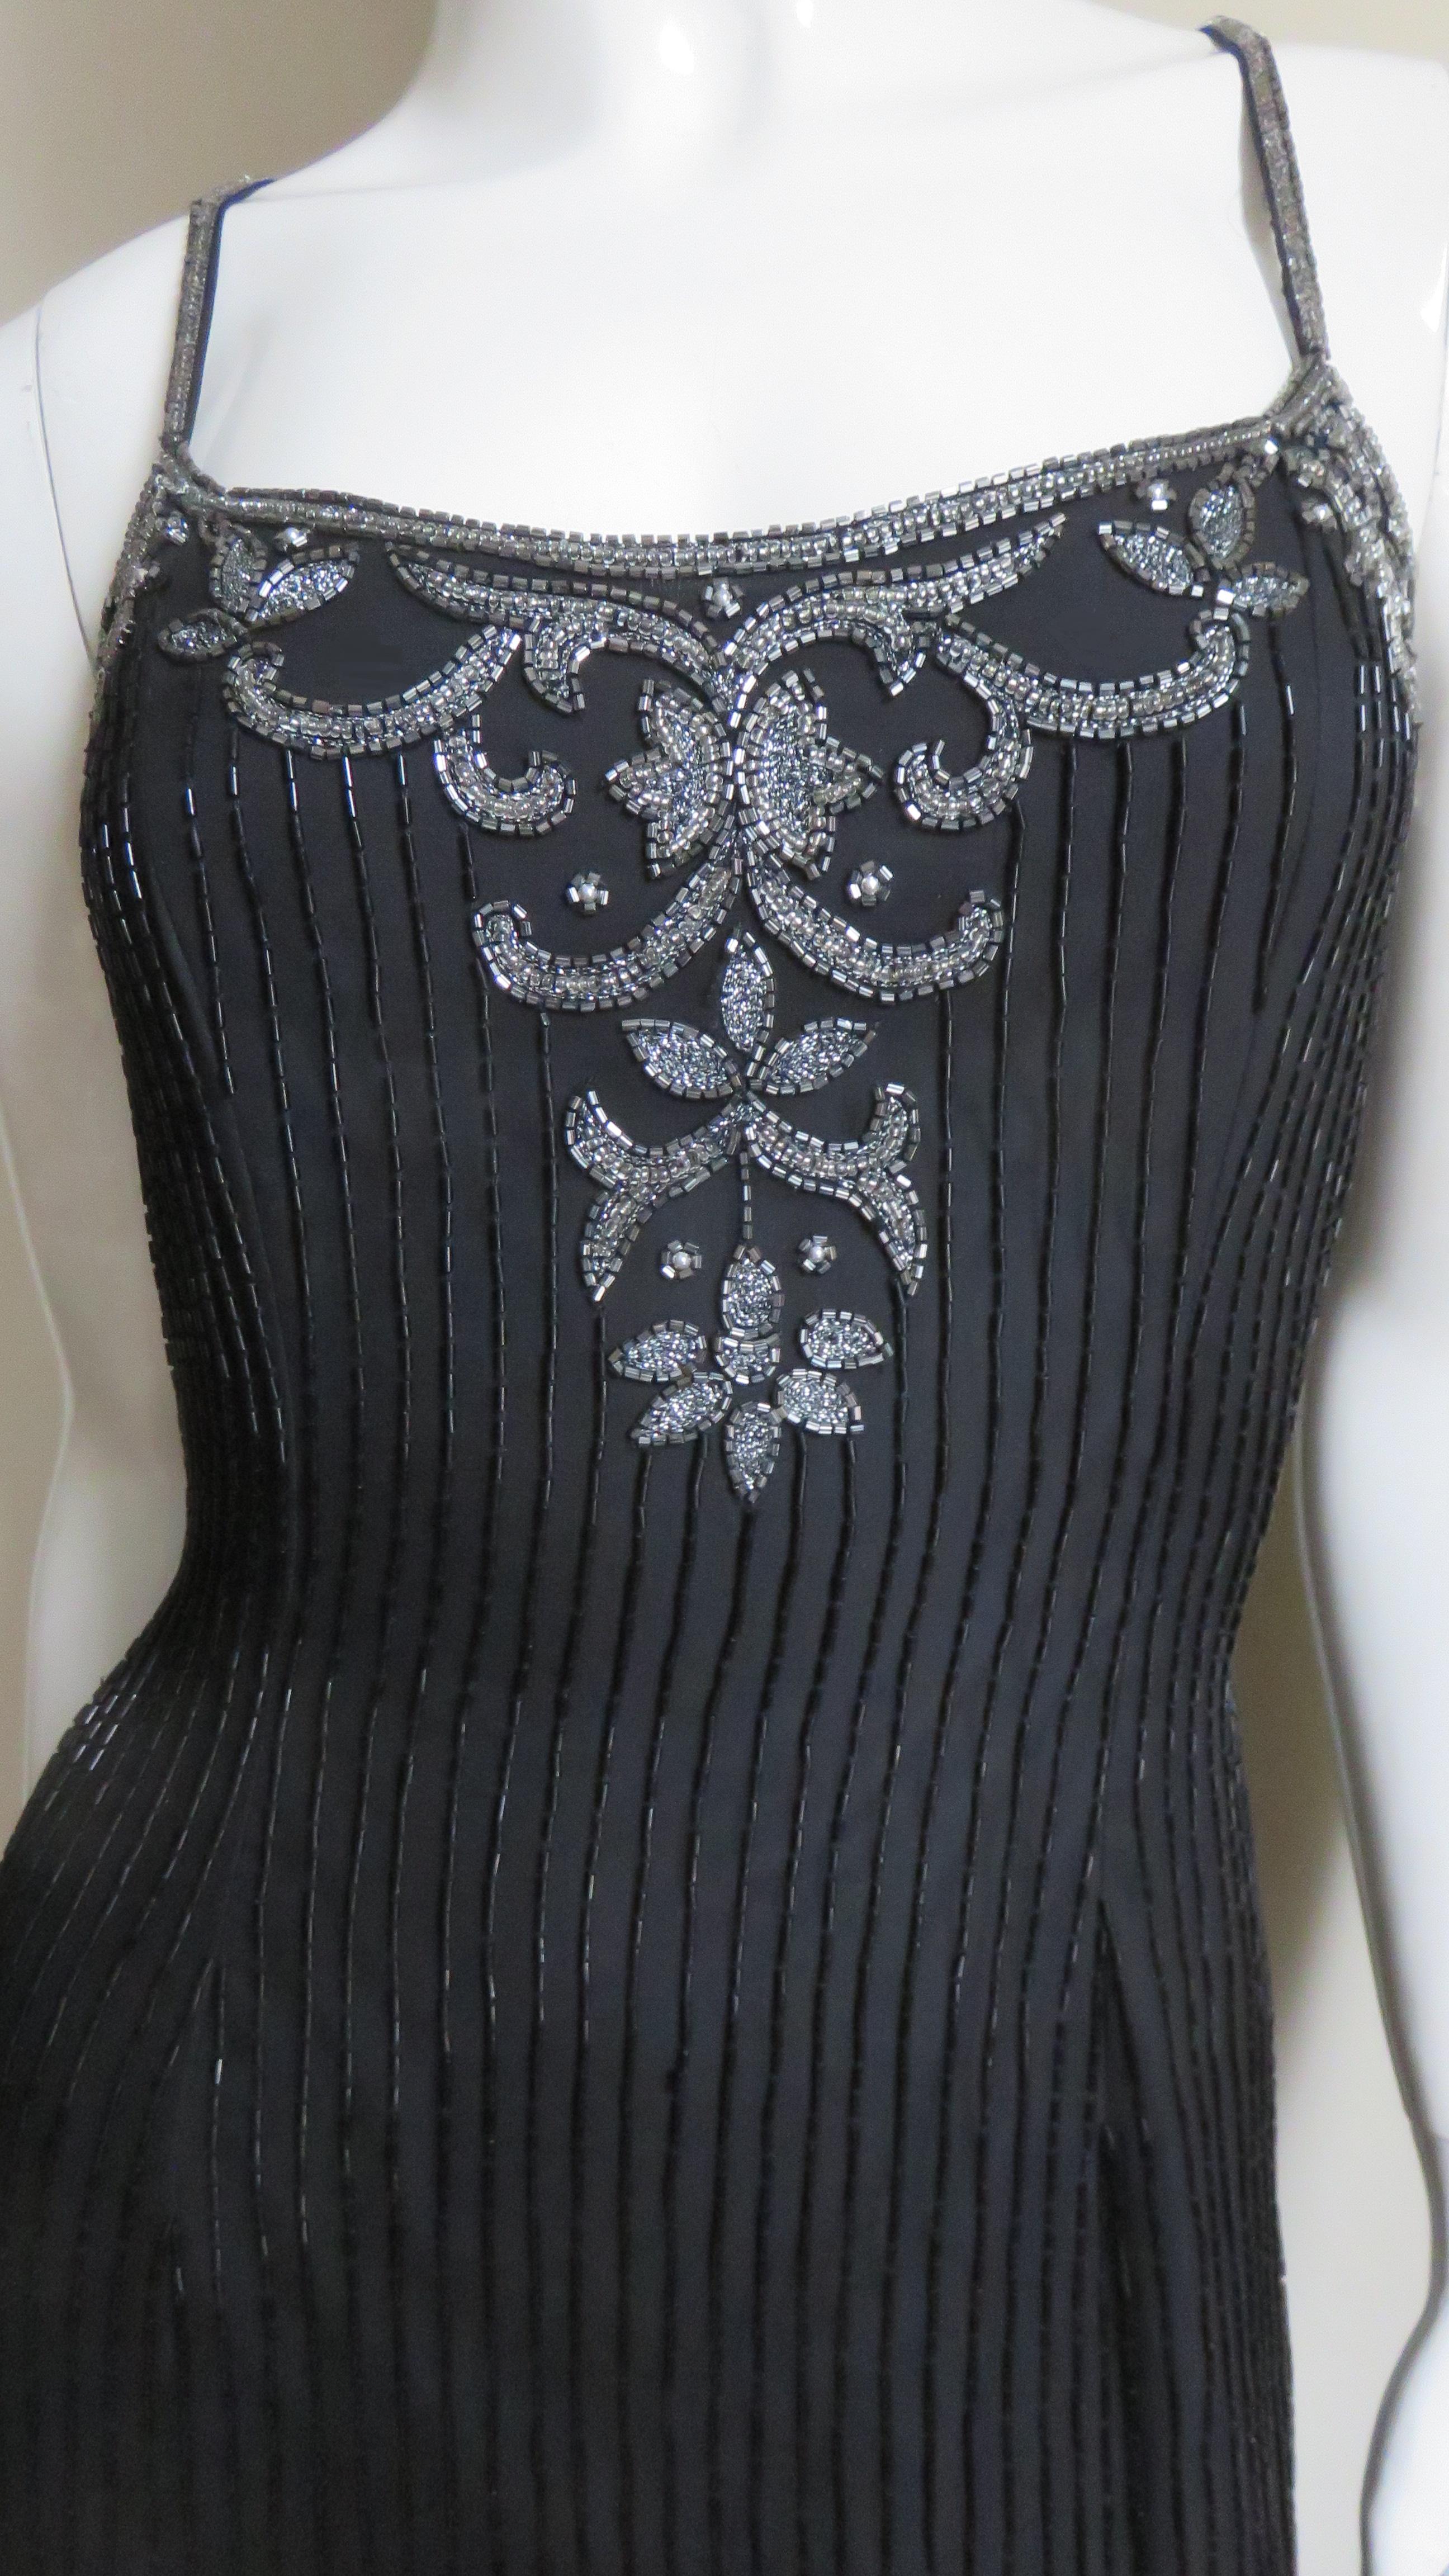 Sonia Rykiel Gown with Sheer Back and Beading 1